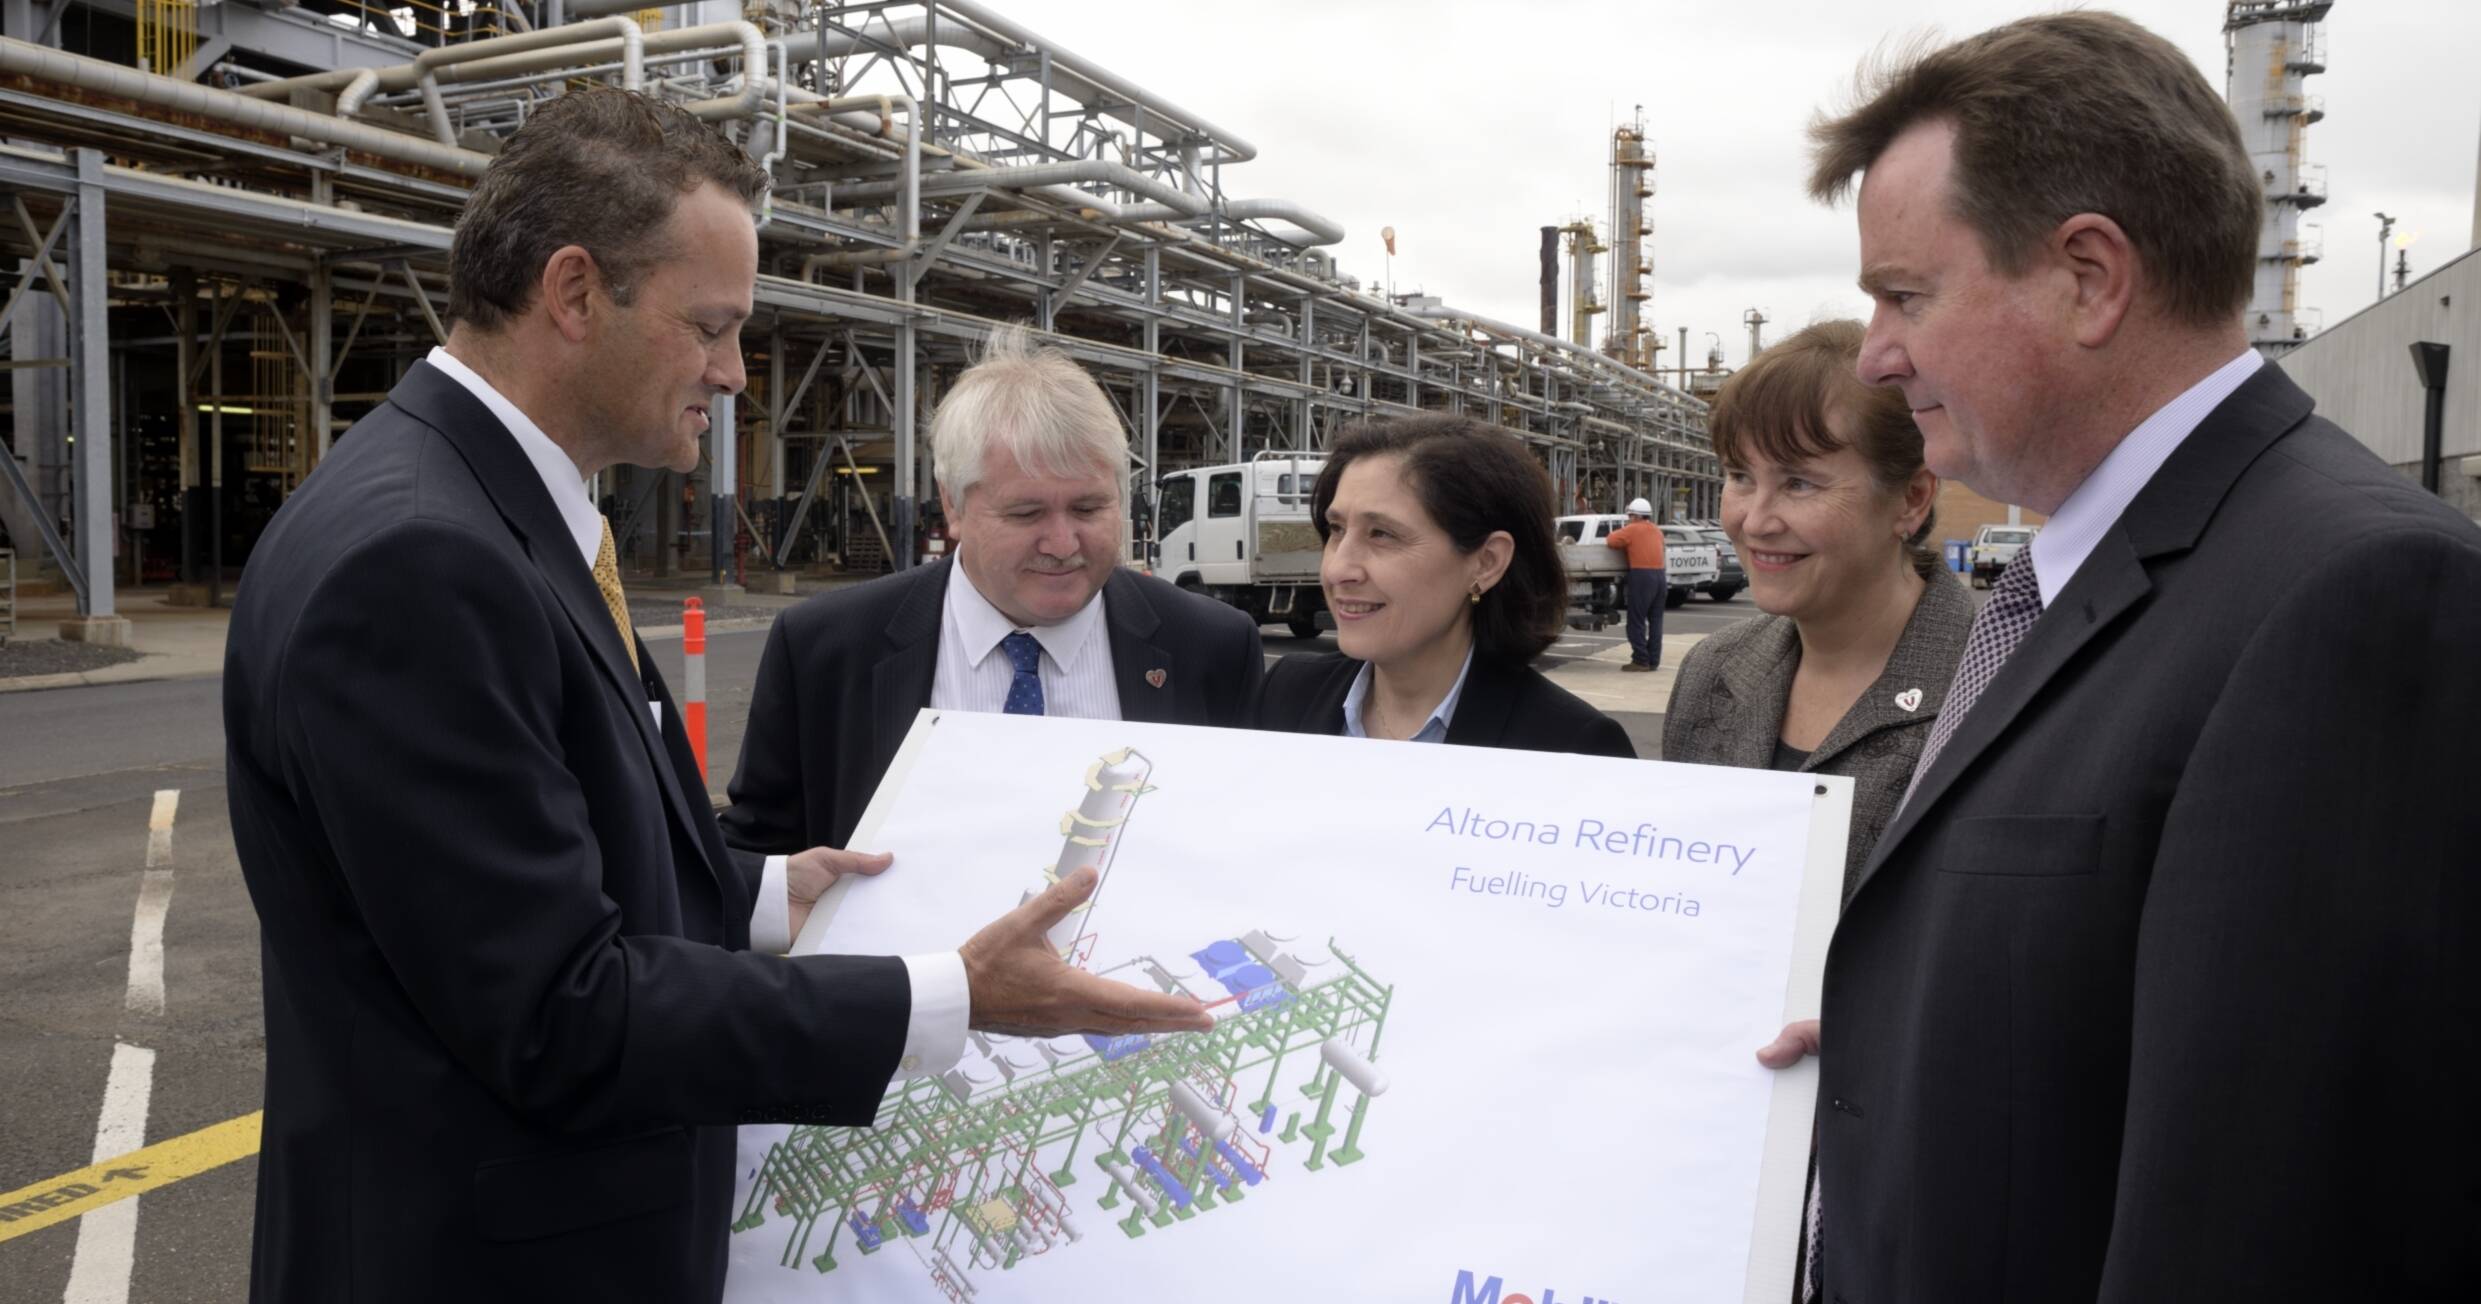 Richard, far-right, at the announcement of the Altona refinery expansion project in 2016